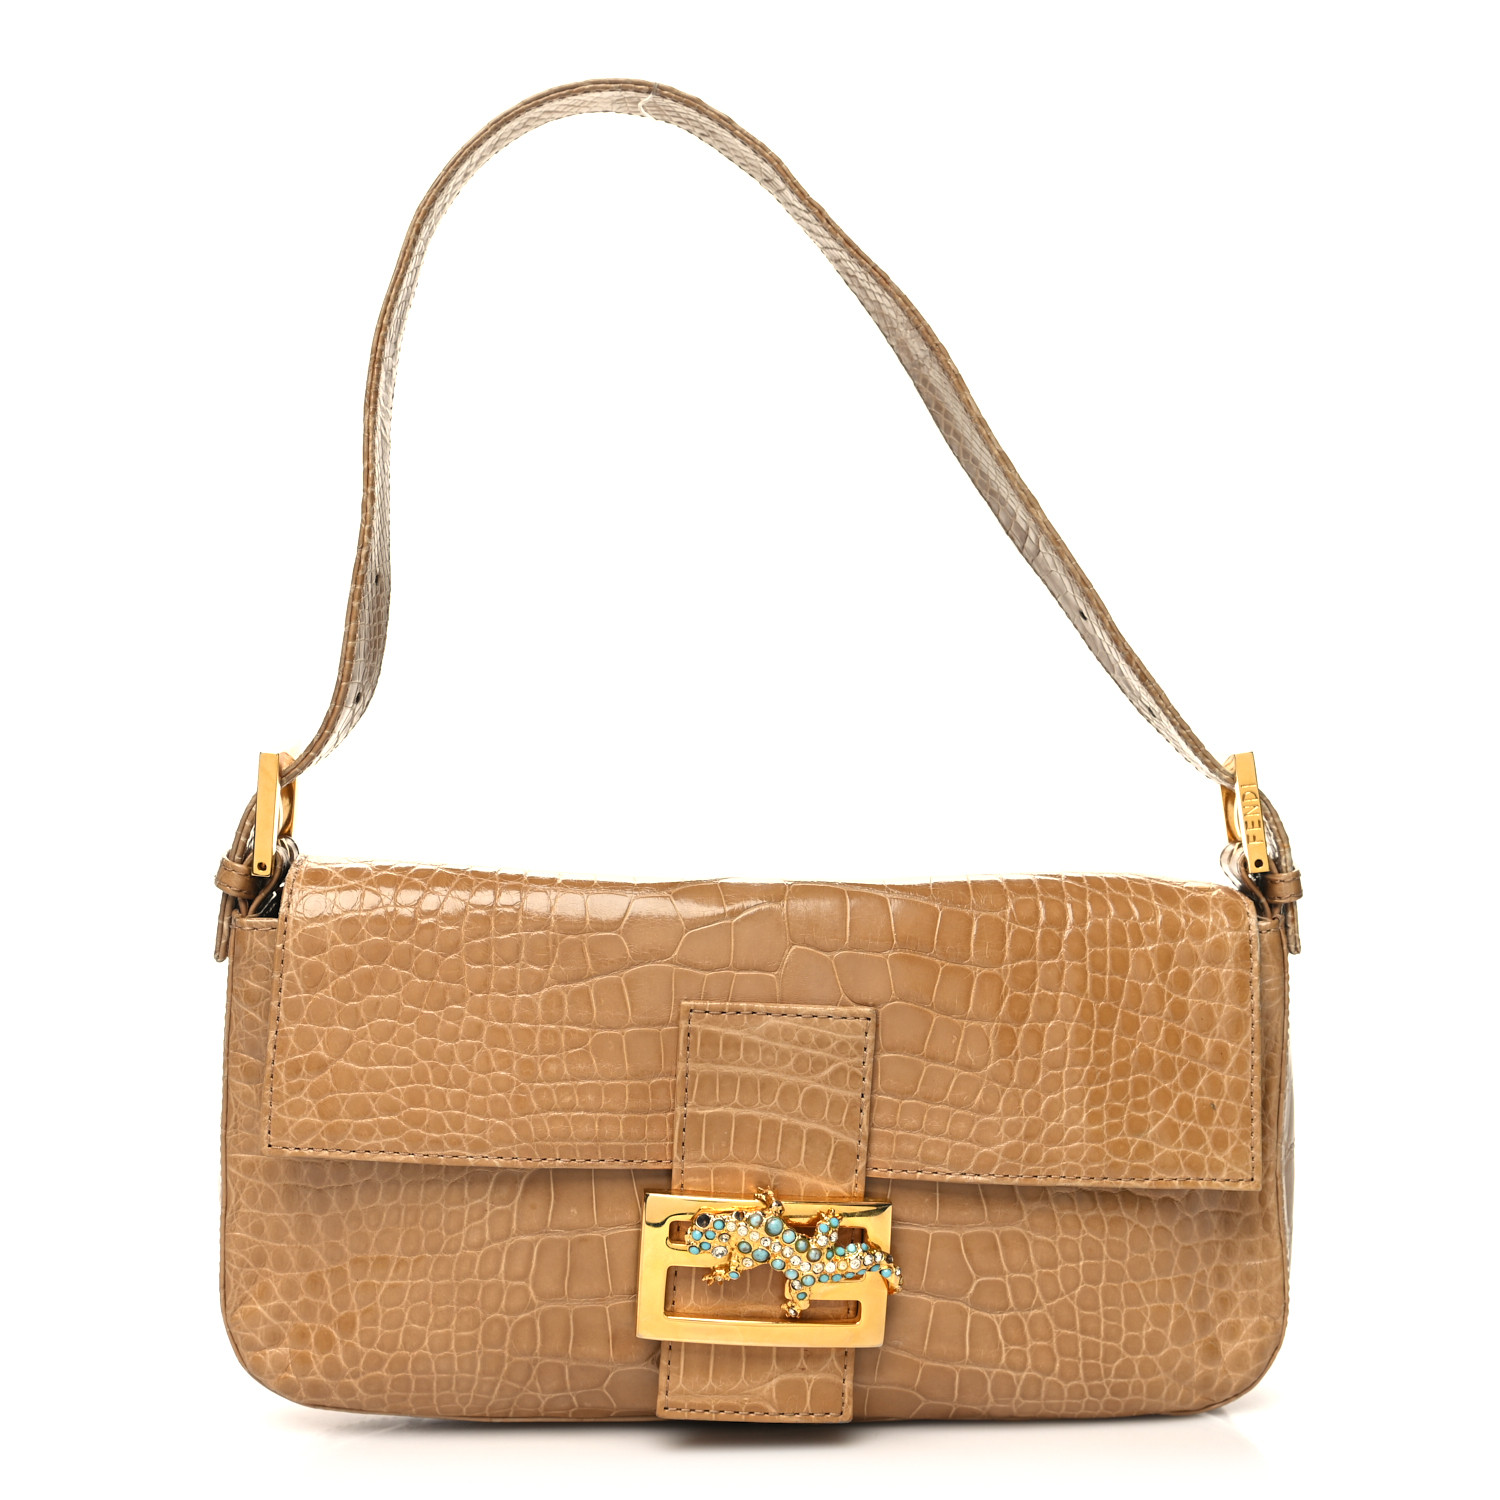 image of FENDI Crocodile Crystal Lizard Baguette in the color Beige by FASHIONPHILE